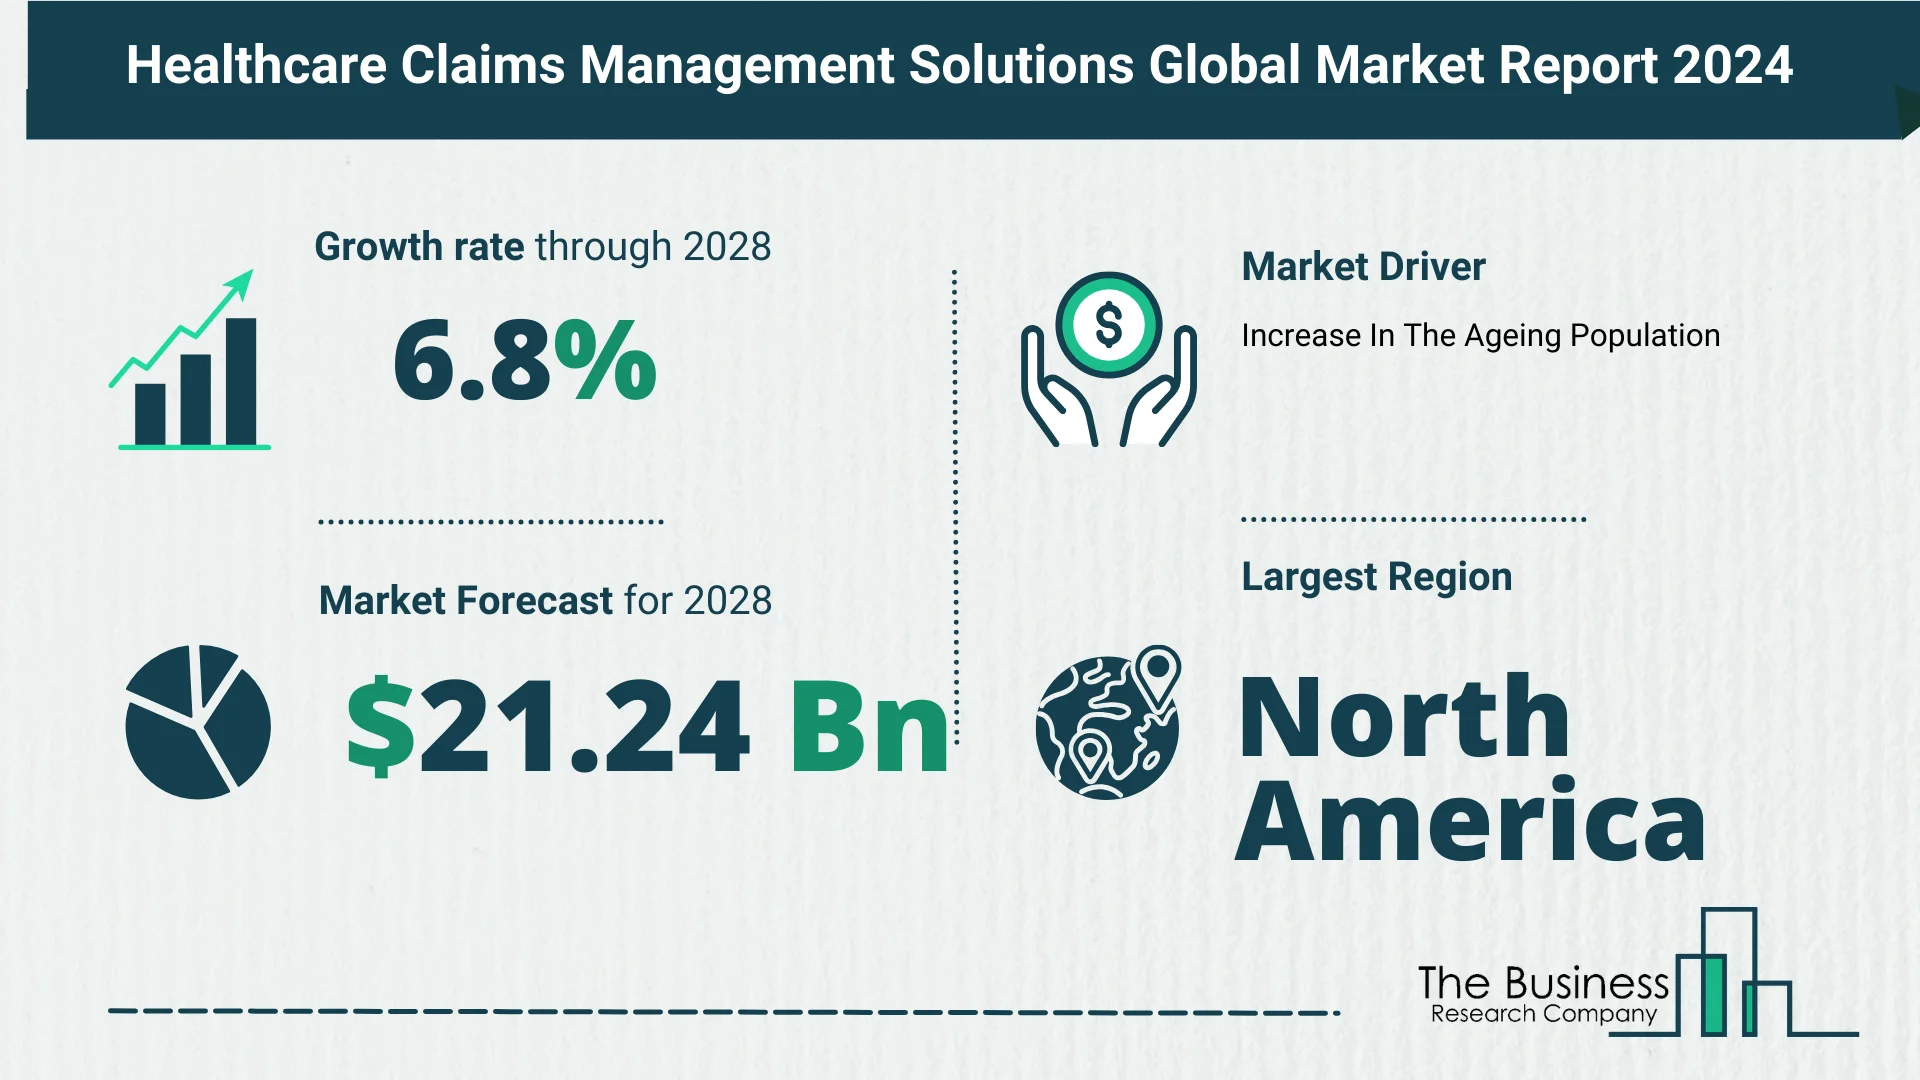 Key Trends And Drivers In The Healthcare Claims Management Solutions Market 2024